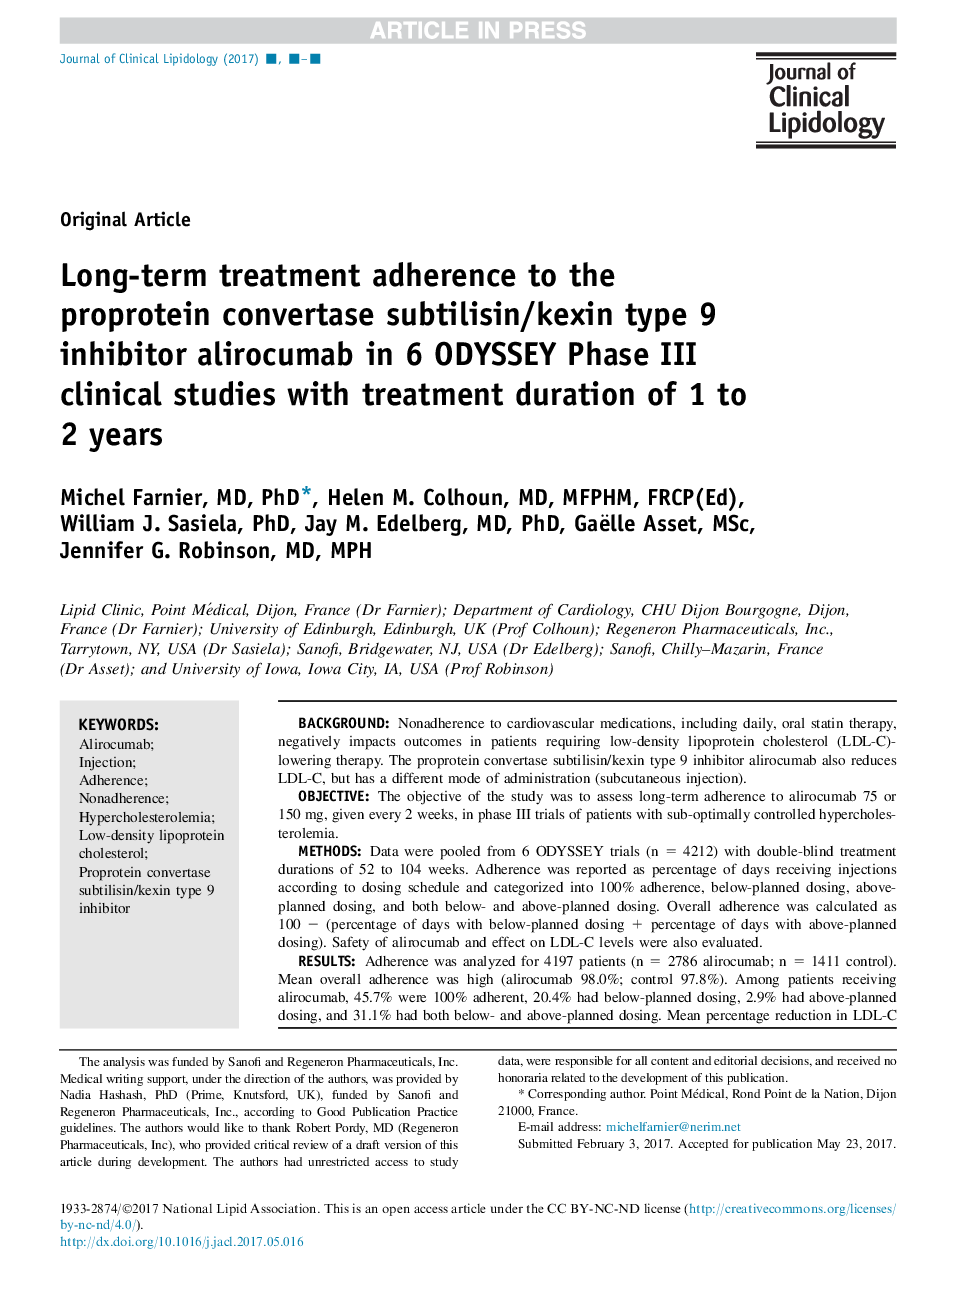 Long-term treatment adherence to the proprotein convertase subtilisin/kexin type 9 inhibitor alirocumab in 6 ODYSSEY Phase III clinical studies with treatment duration of 1 to 2Â years